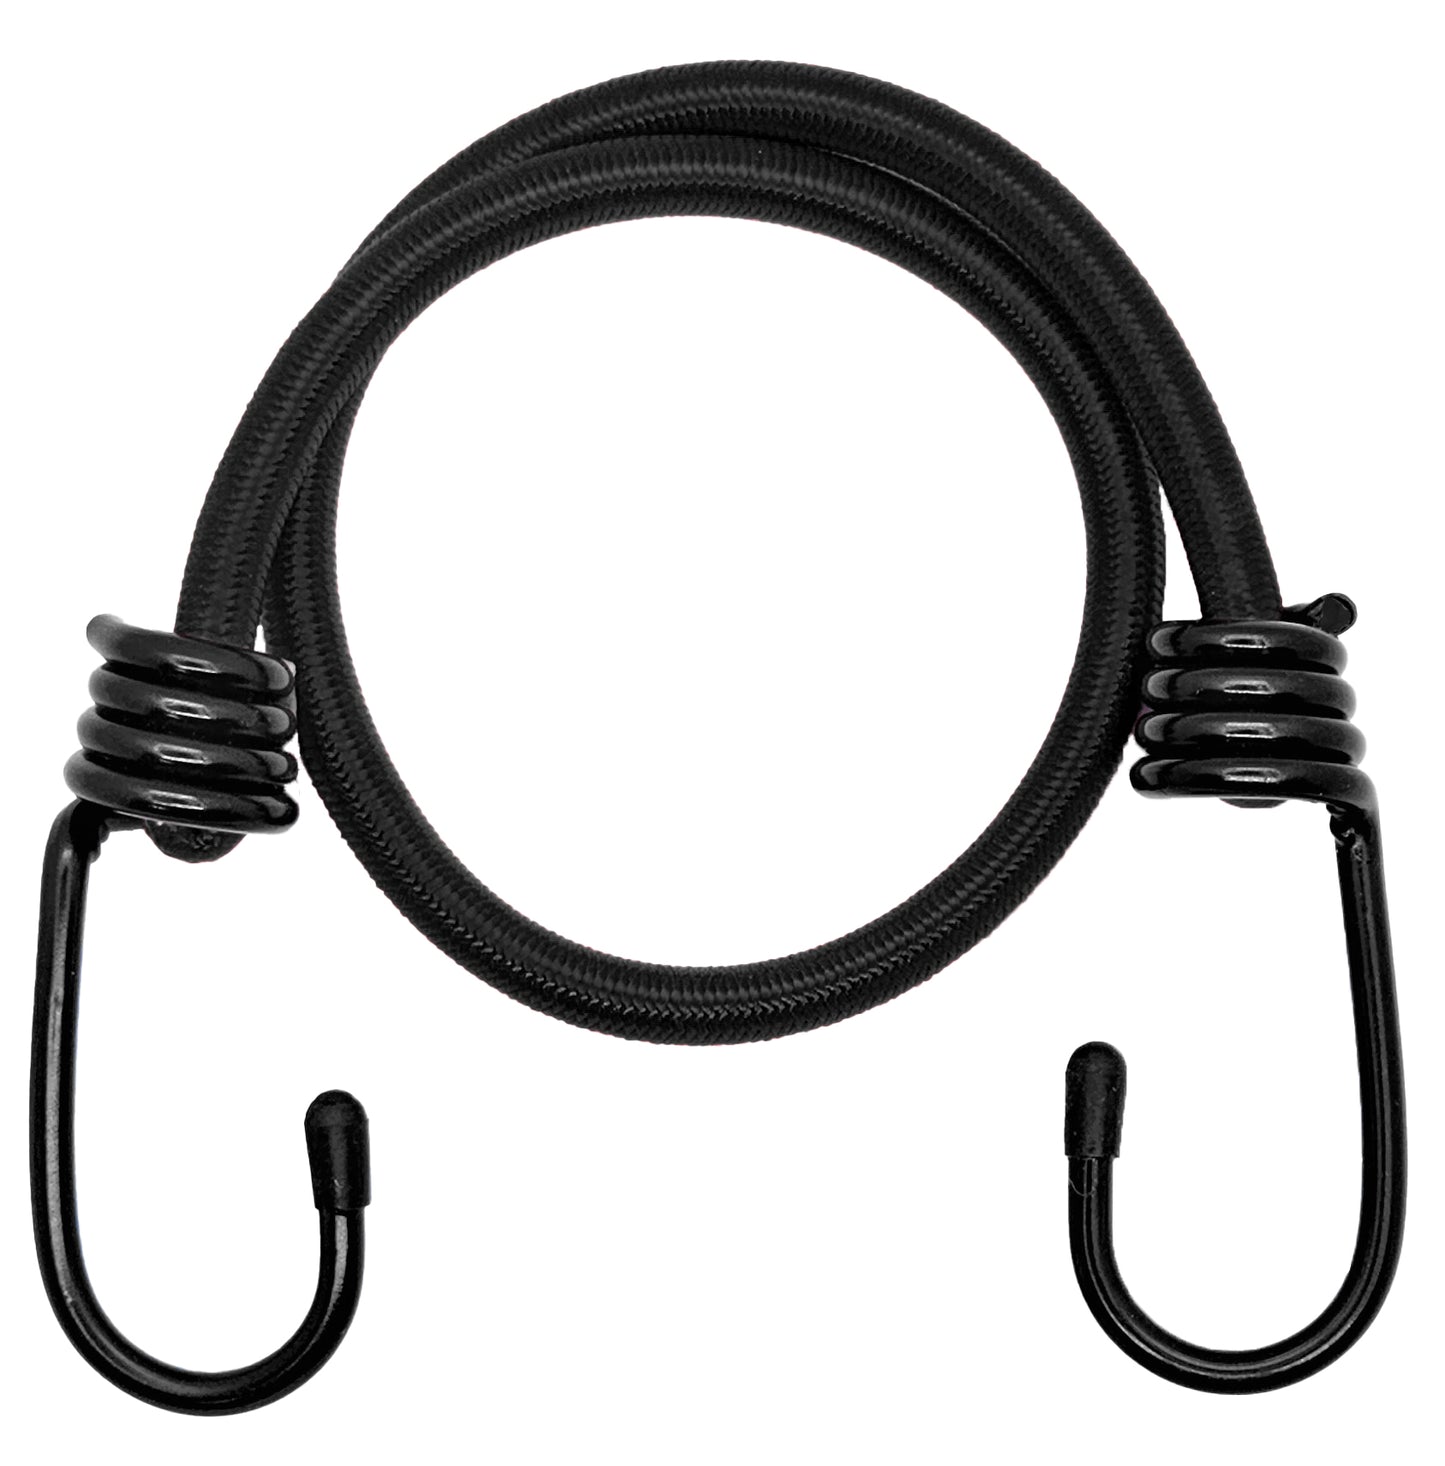 OVERLANDER BUNGEE - Marine-grade Nylon Bungee cord with two Plastic-coated Metal Spring Hooks (Black, 4-Pack)